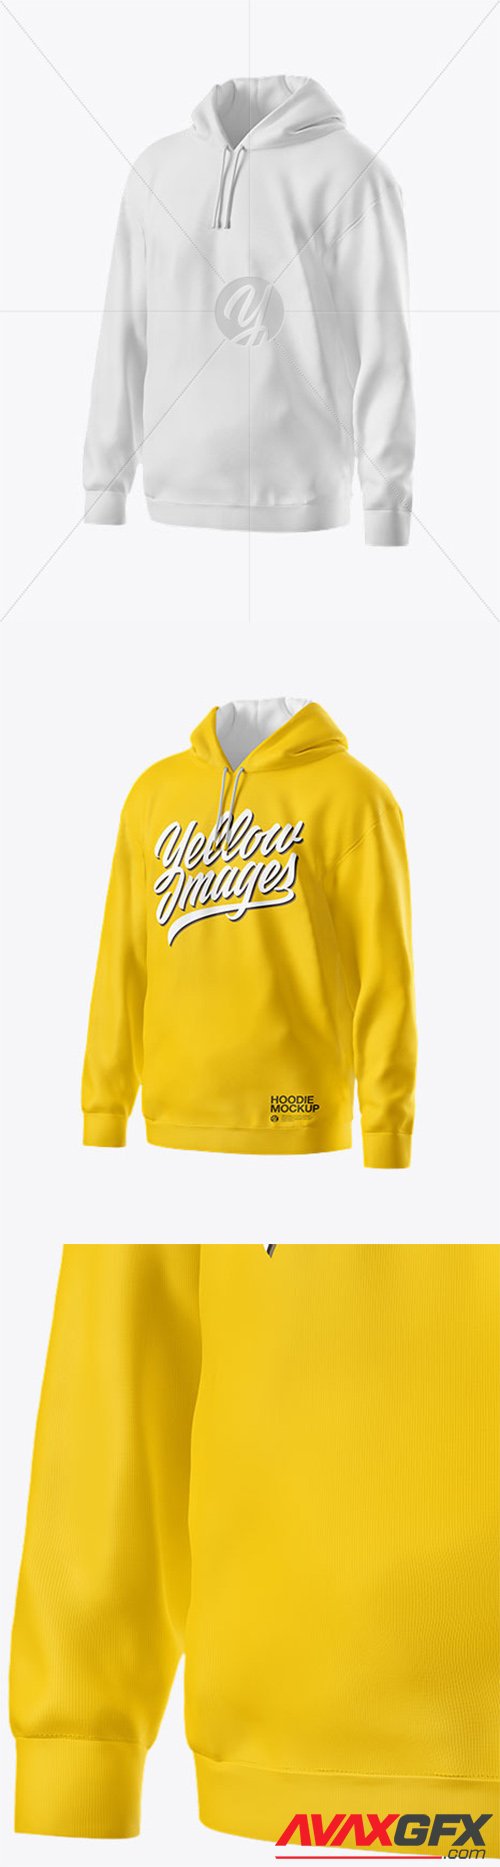 Download Hoodie Mockup - Half Side View 67018 » AVAXGFX - All ...